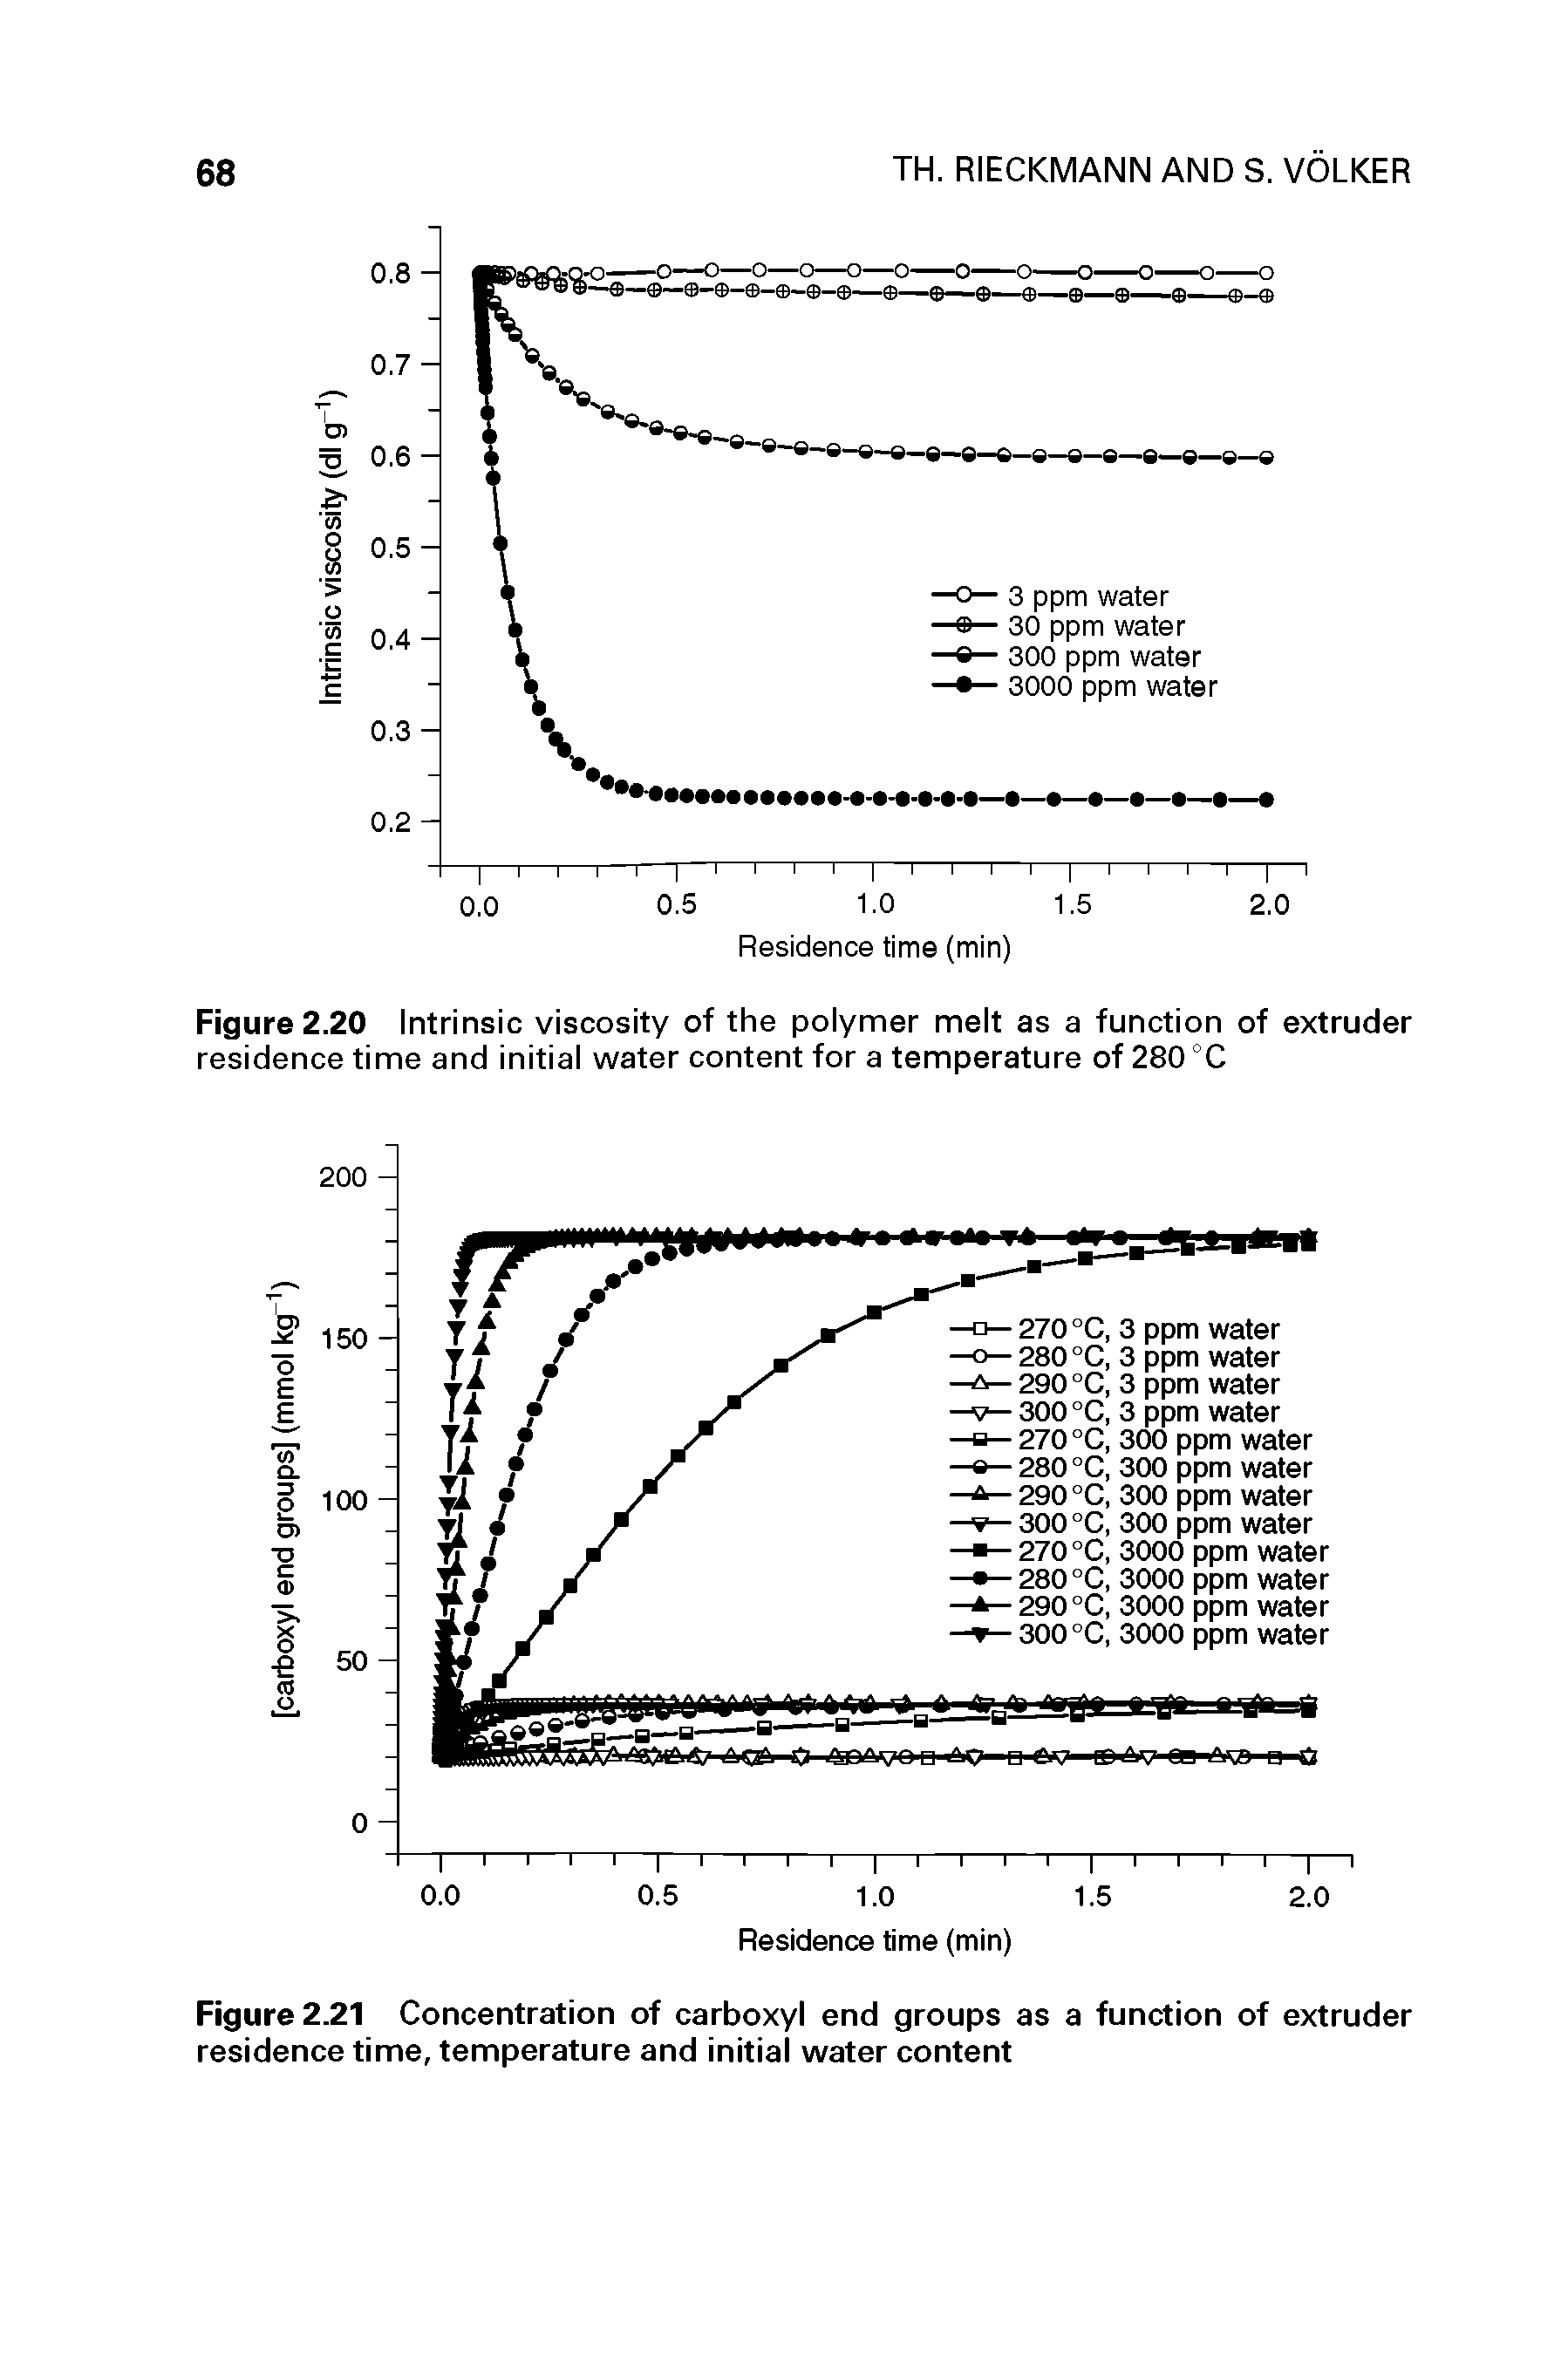 Figure 2.21 Concentration of carboxyl end groups as a function of extruder residence time, temperature and initial water content...